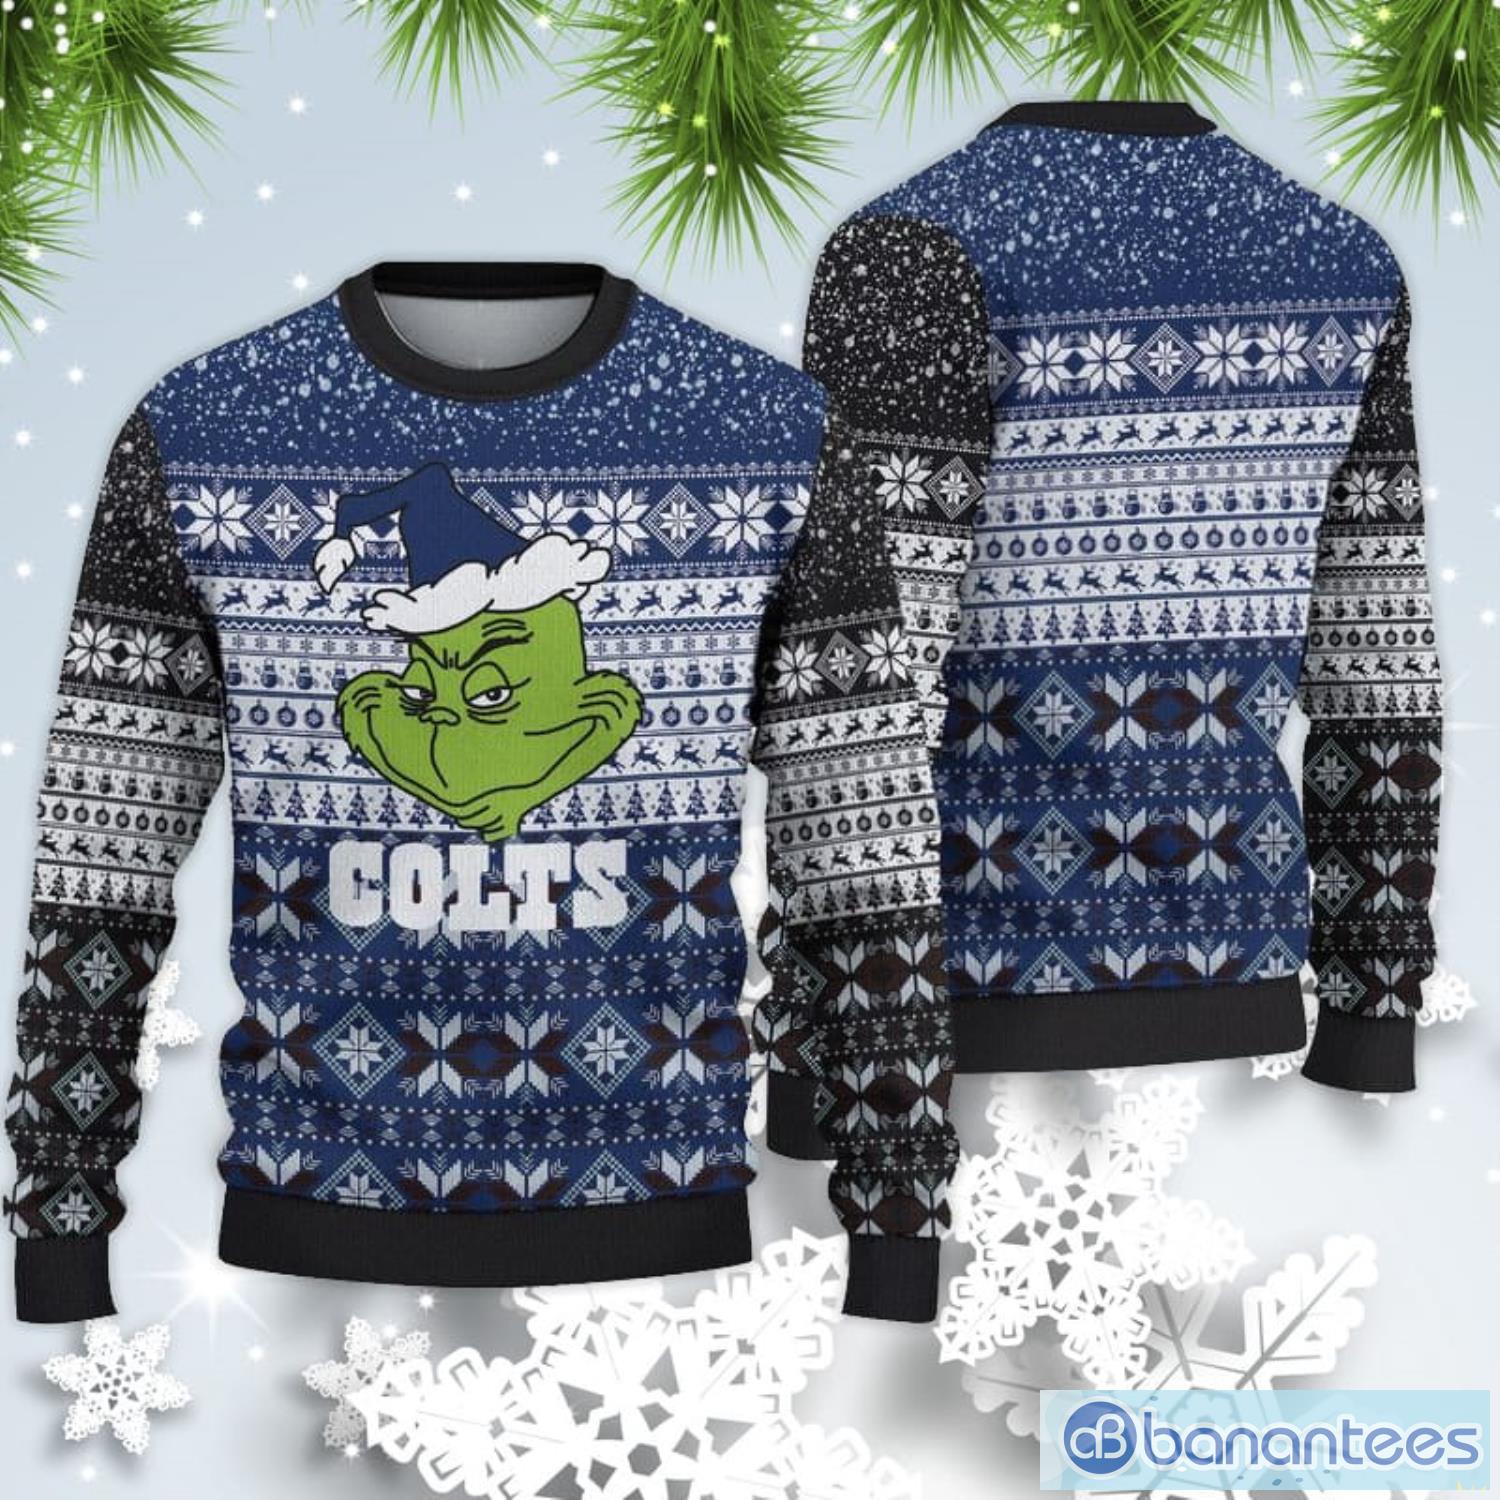 Indianapolis Colts Christmas Grinch Sweater For Fans Product Photo 1